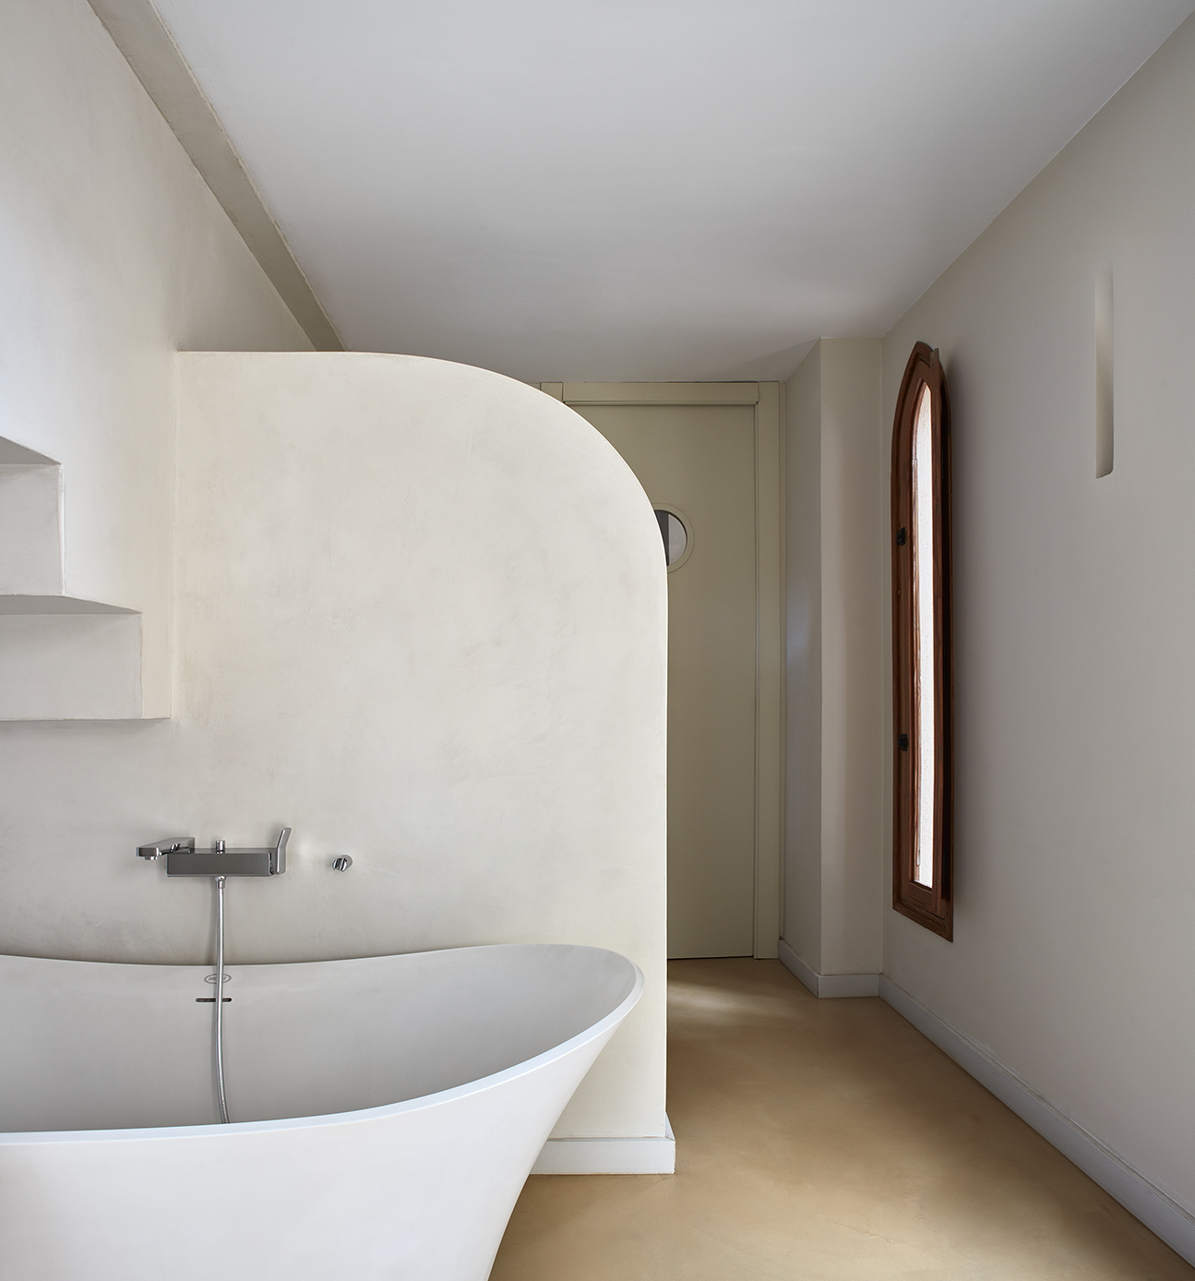 Microcement bathroom on walls and floor at Casa Isabel